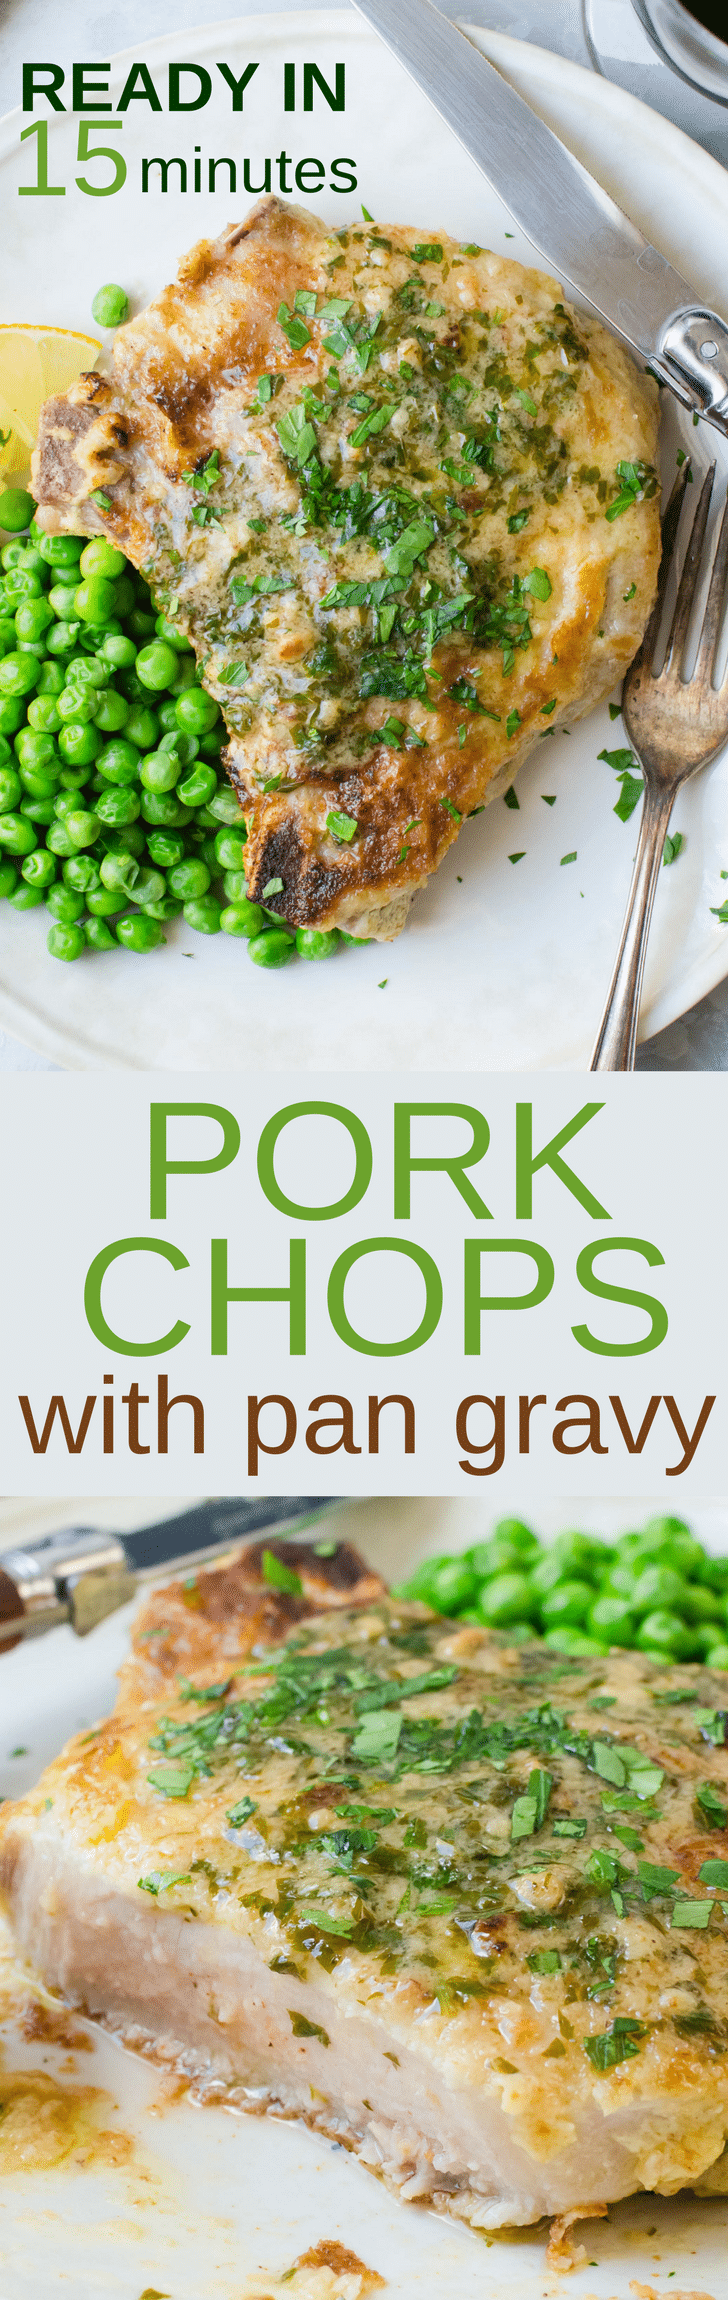 Want to know how to pan fry pork chops? These pork chops with pan gravy are an easy, hearty weeknight meal. Simple preparation and ready in 15 minutes, breaded fried, pork chops will satisfy everyone's appetite! #porkchops #panfriedporkchops #porkchopsrecipe #mustardporkchops #dijonporkchops #howtopanfryporkchops #pansauce #pangravy #lemonjuice #15minutemeals #under30minutes #mealsinminutes #easyporkchops #quickporkchops #breadedporkchops #fastporkchops #porkchopsrecipe #bestporkchoprecipe